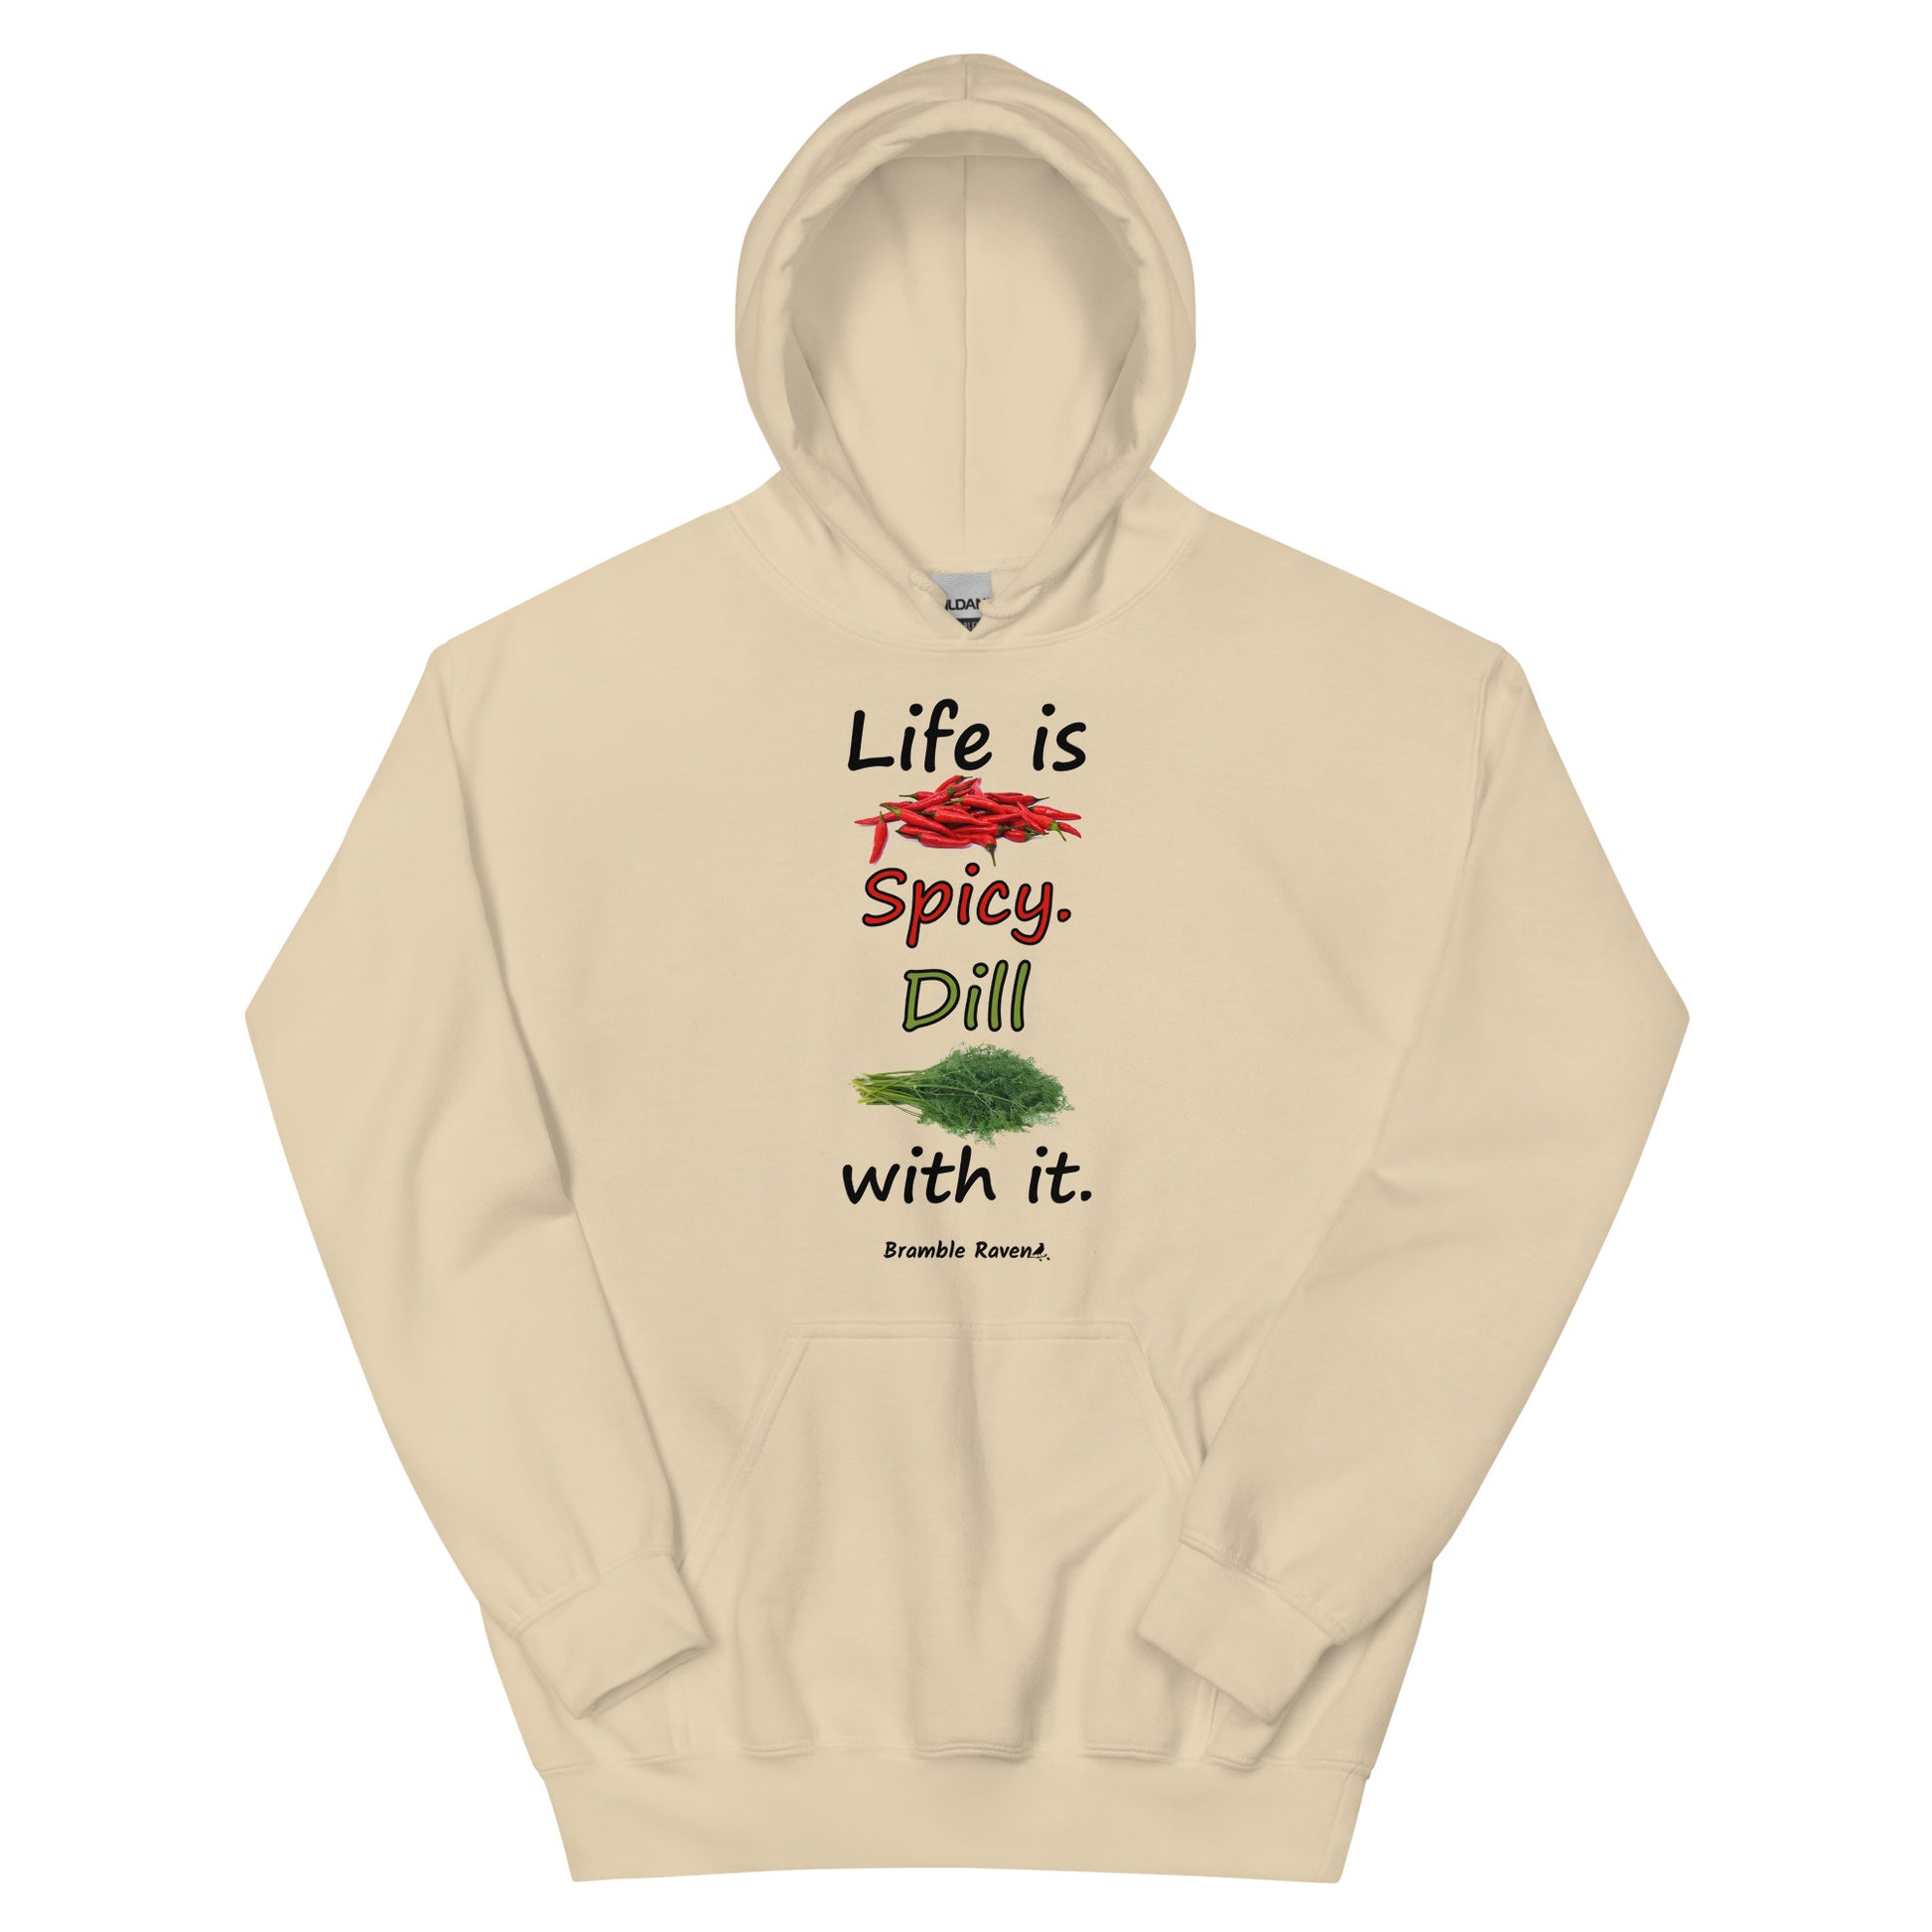 Sand colored unisex heavy blend hoodie.  Double lined hood, matching drawcord, front pouch pocket. Rib knit cuffs and waistband. Features text and image: Life is spicy. Dill with it. 